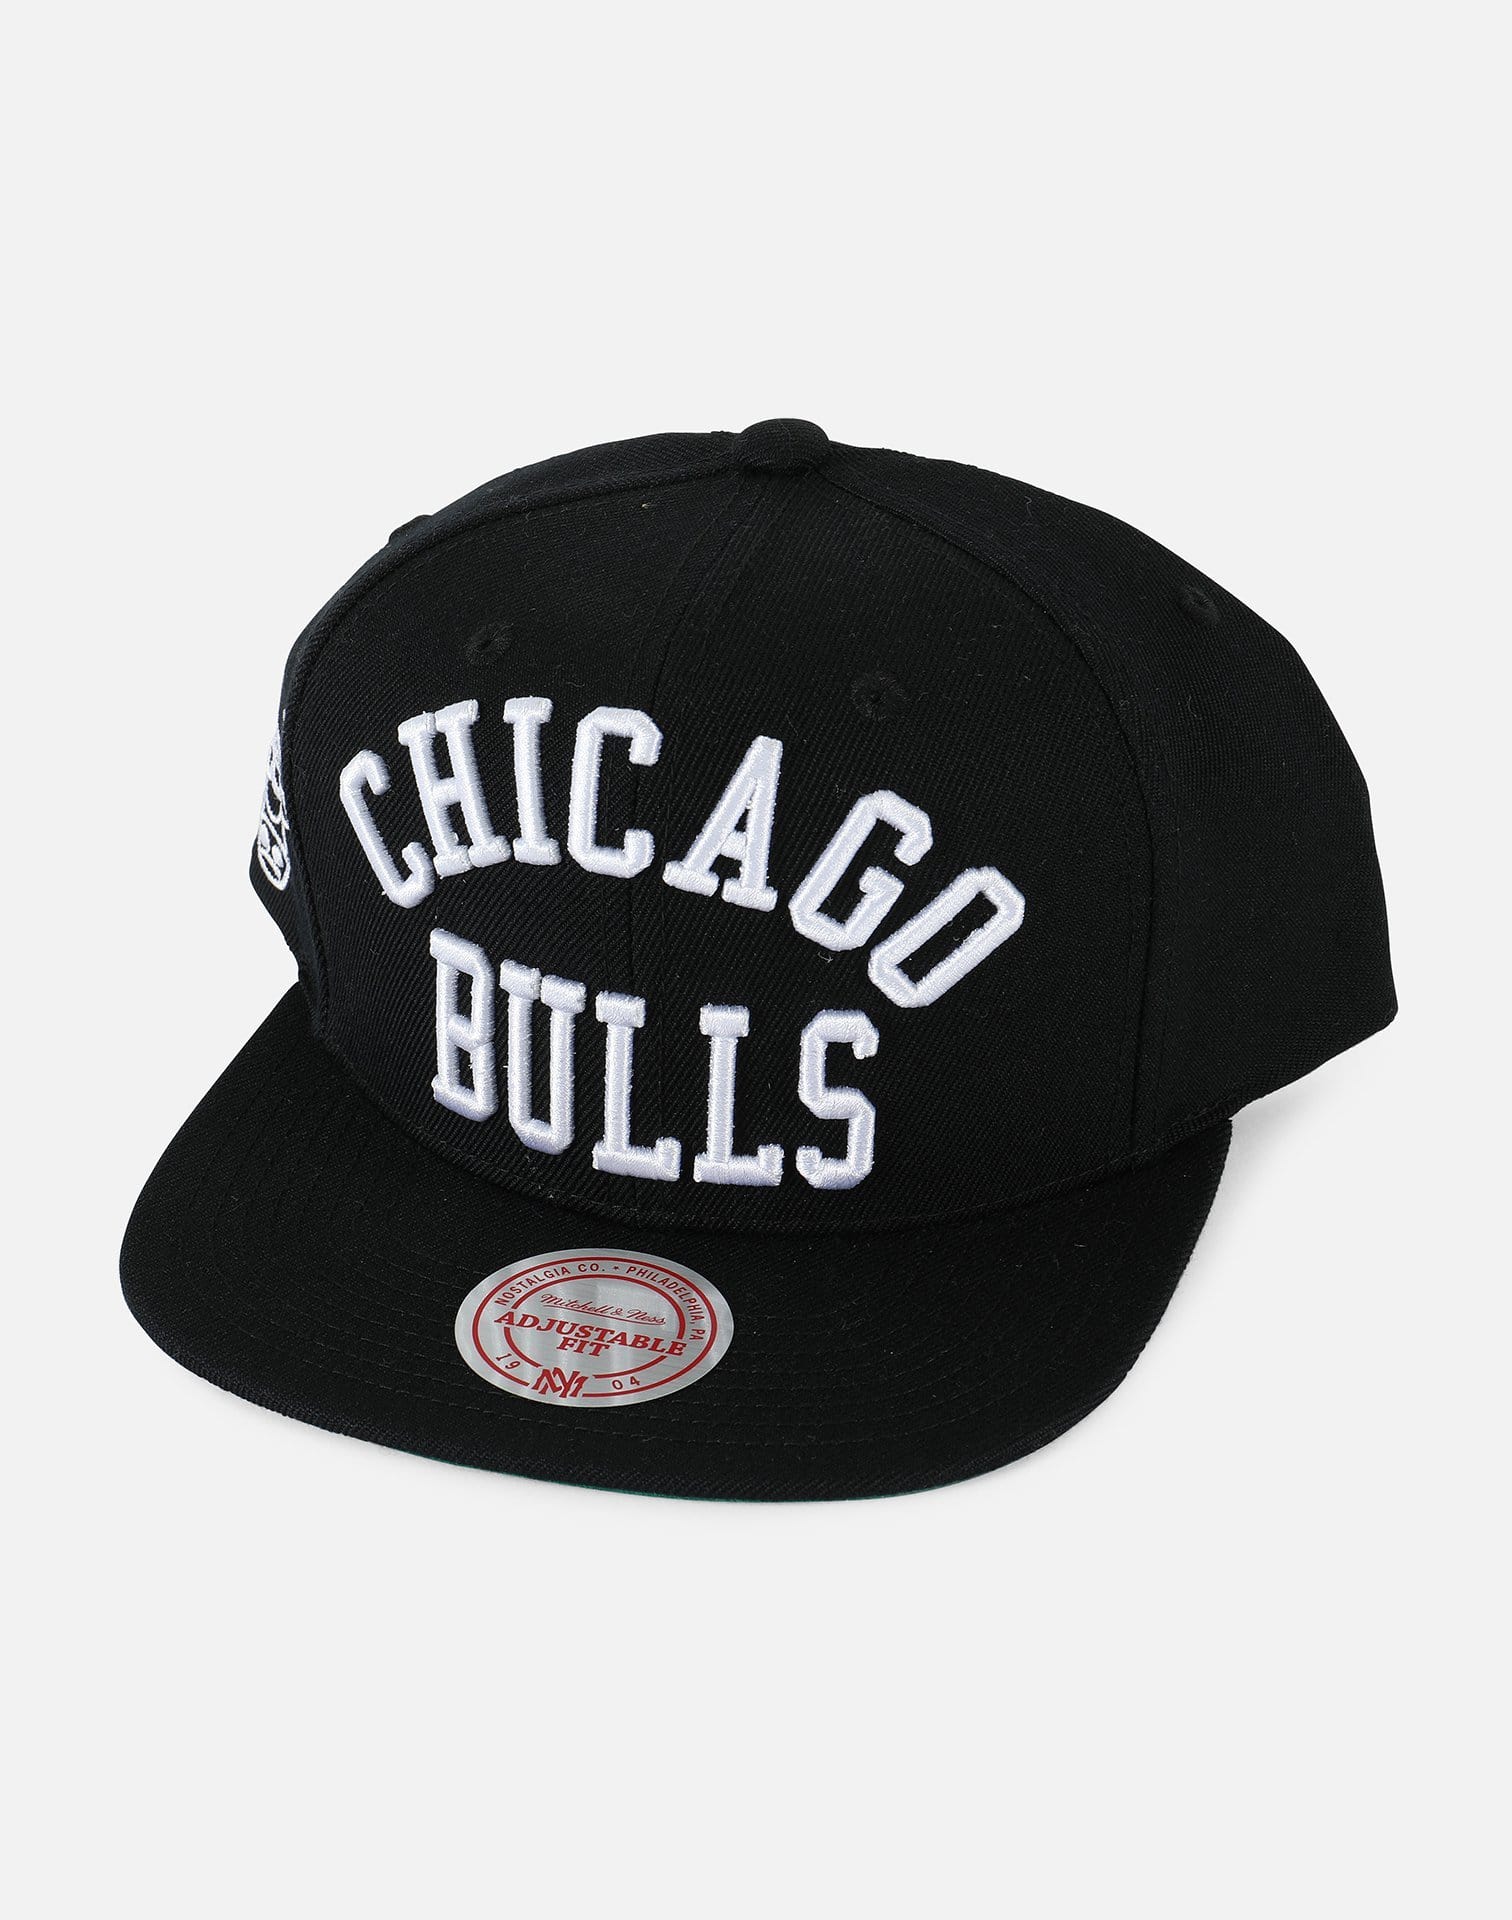 Mitchell and Ness Chicago Bulls Arch Team Snapback